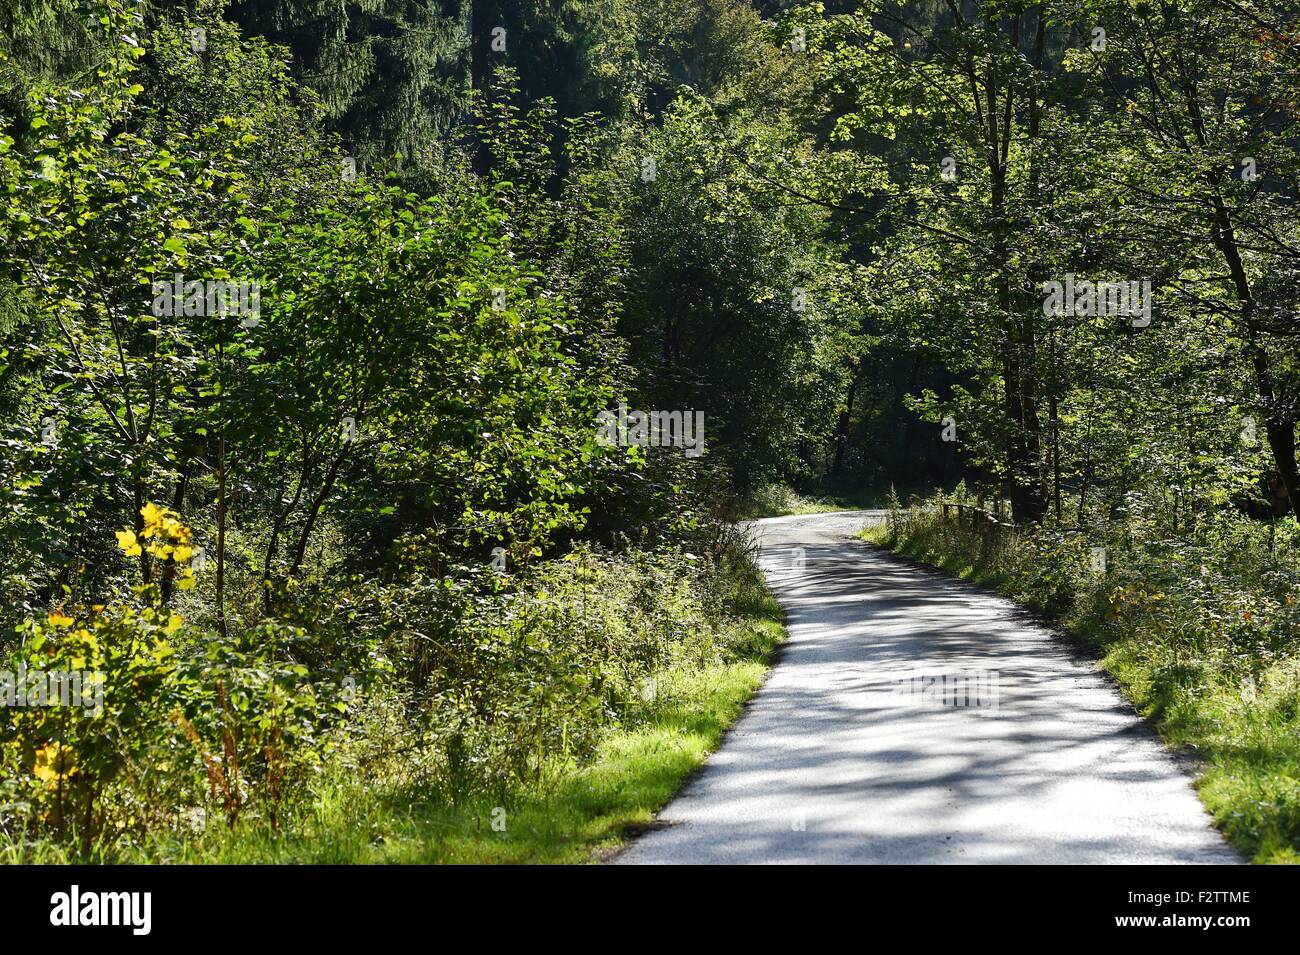 A street in the forest, Germany, near city of Riefensbeek, 23. September 2015. Photo: Frank May Stock Photo